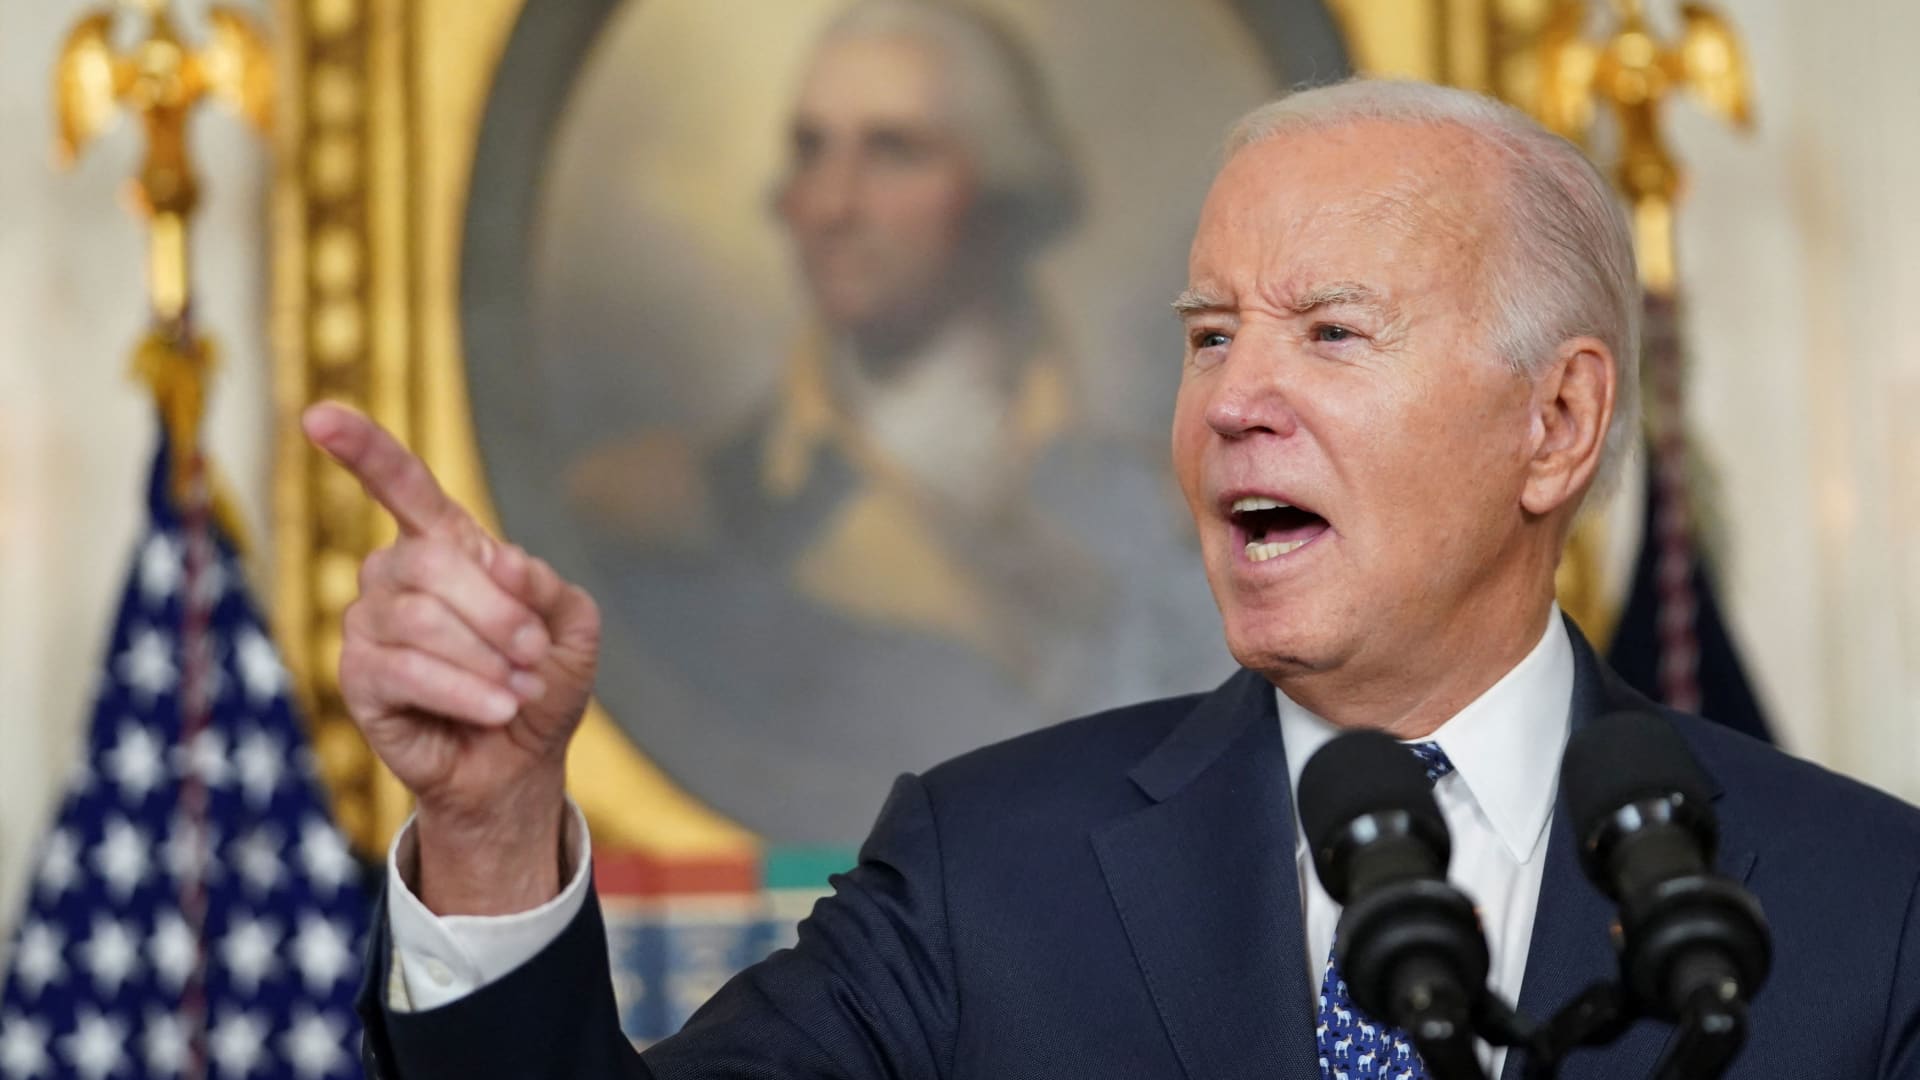 Biden is calling out companies on myth of ‘his administration is underwater with independents,’ Andrew Yang says